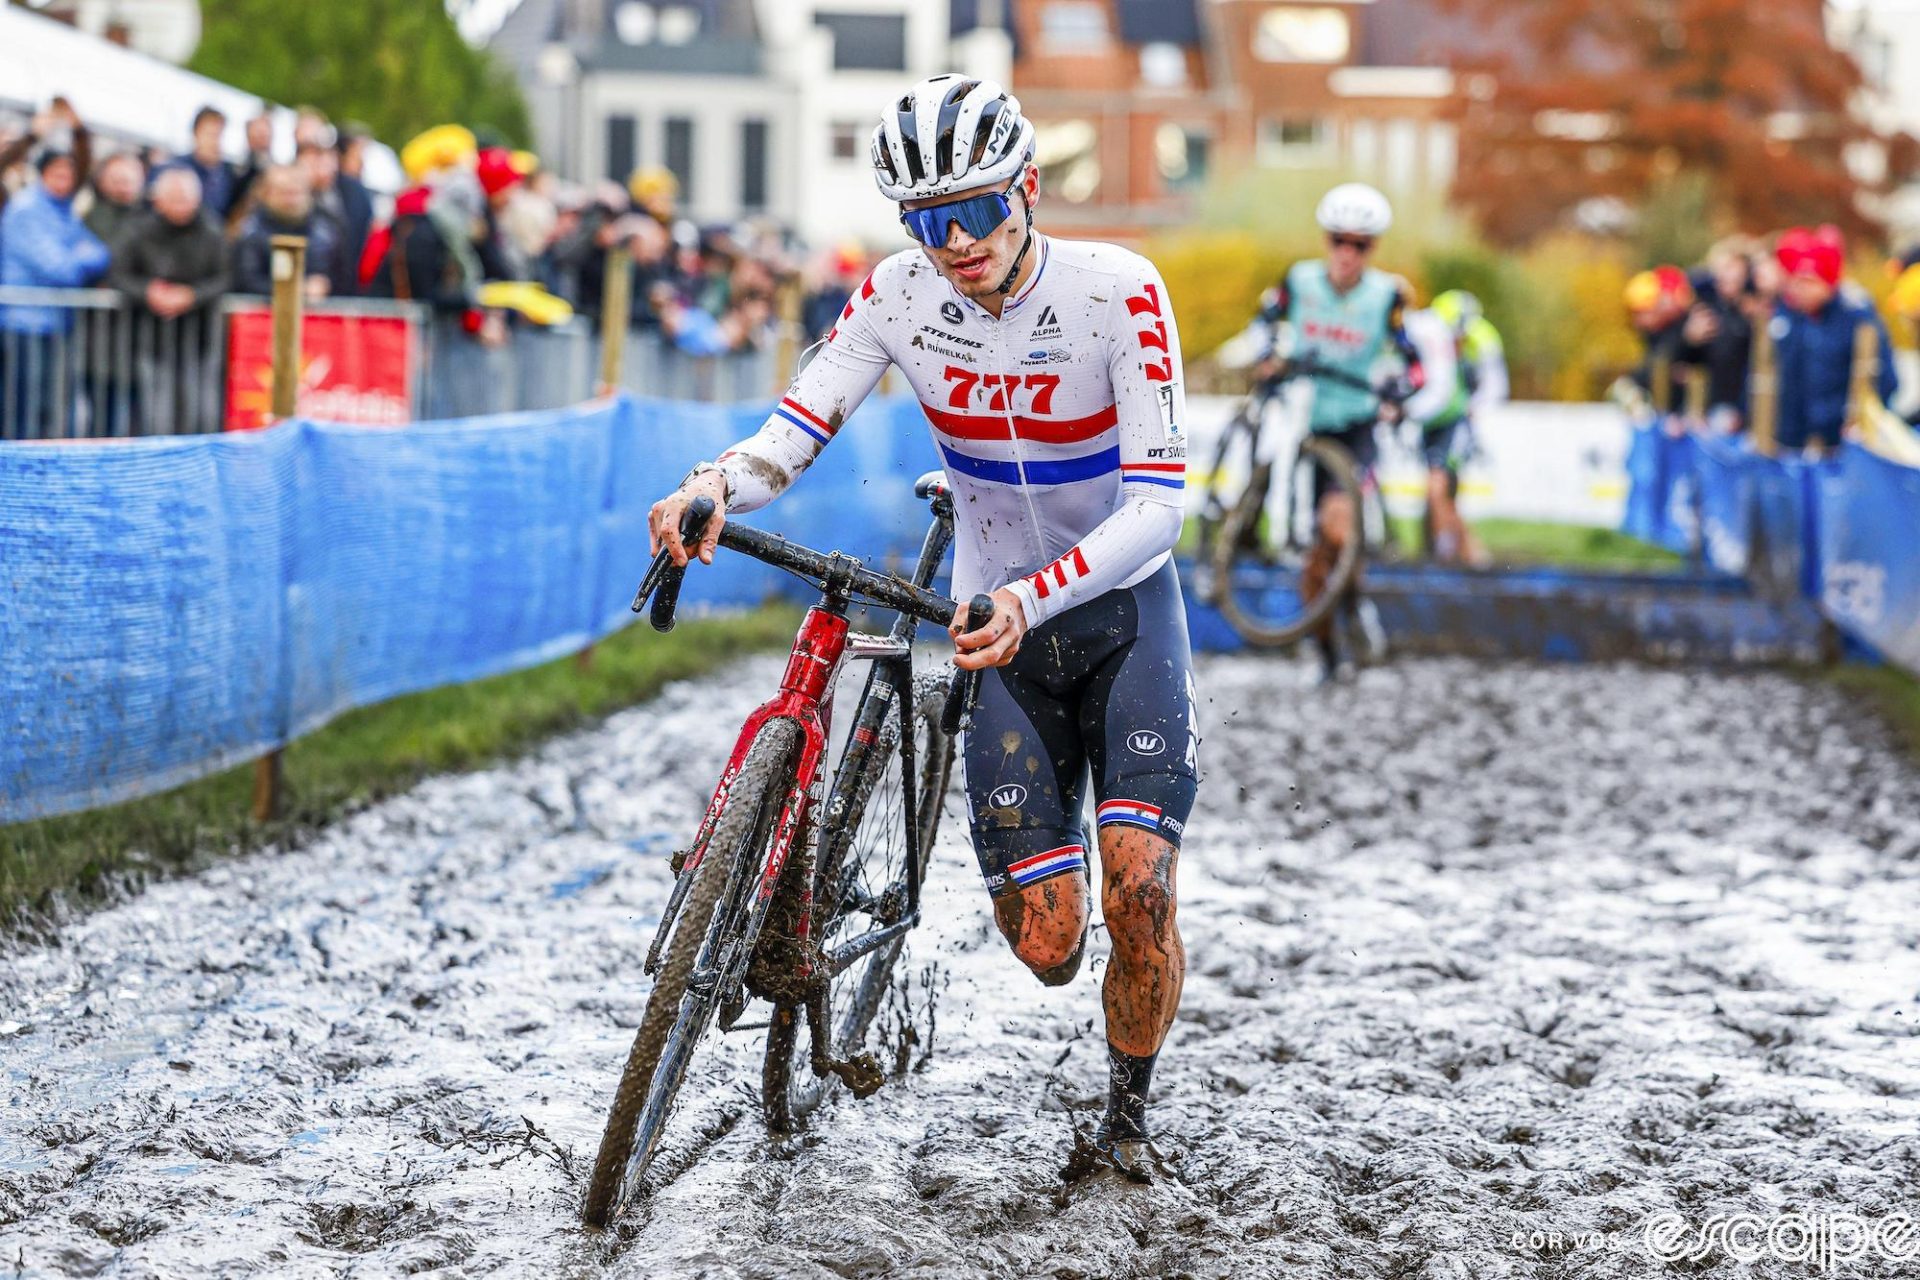 Cameron Mason races through the mud at the X2O round at Kortrijk in 2023. He's running alongside his bike, in near ankle-deep mud. It must be an early lap because his white British champion's kit is still relatively clean.